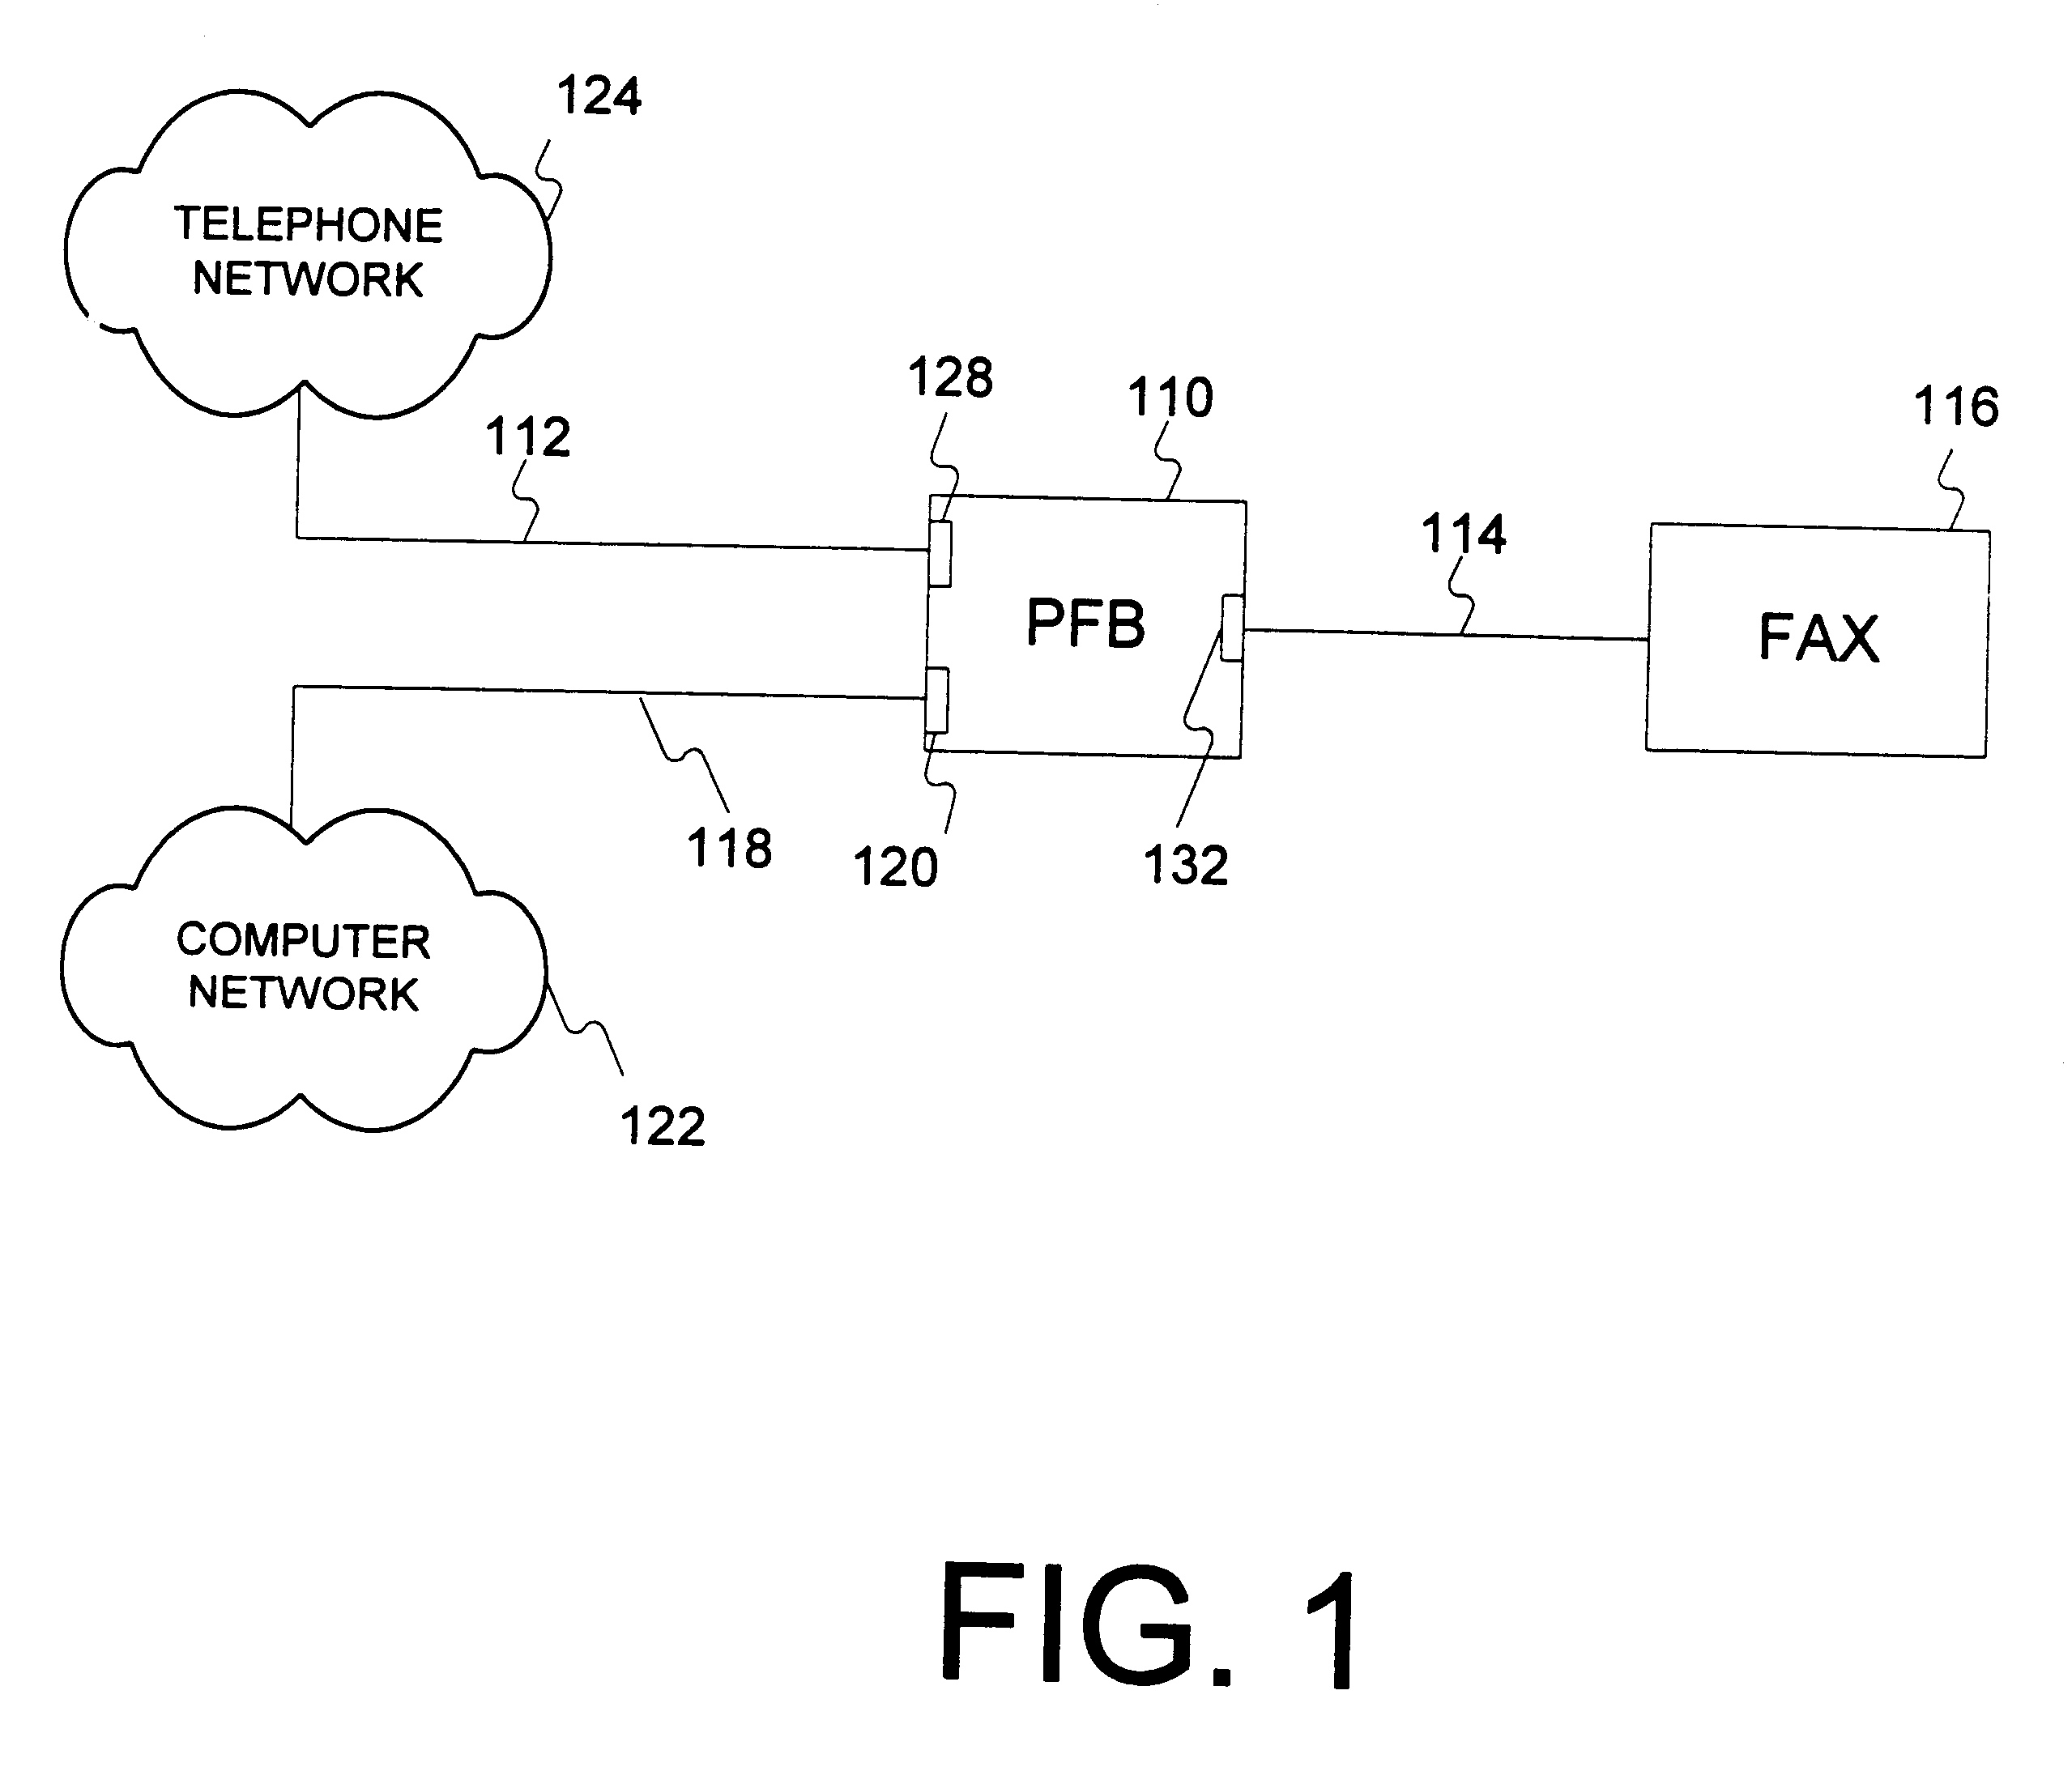 Apparatus and method for reception and transmission of information using different protocols